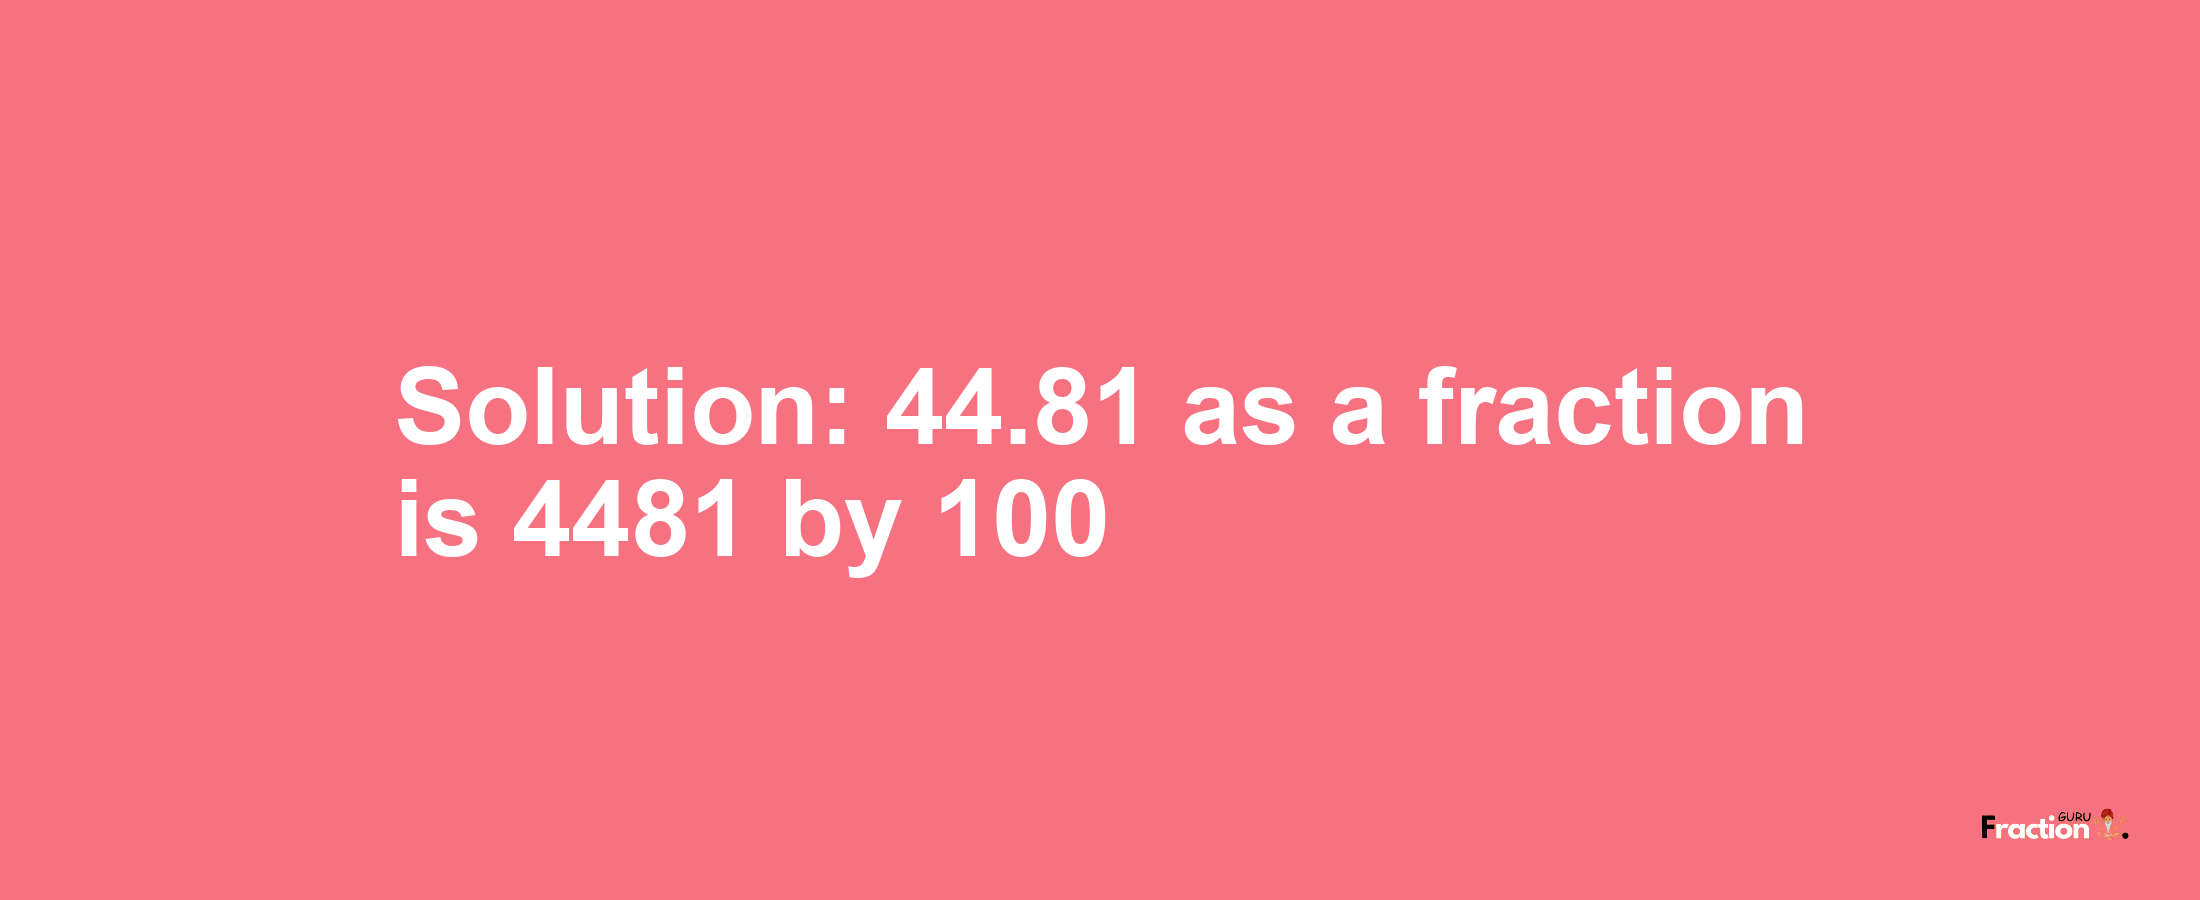 Solution:44.81 as a fraction is 4481/100